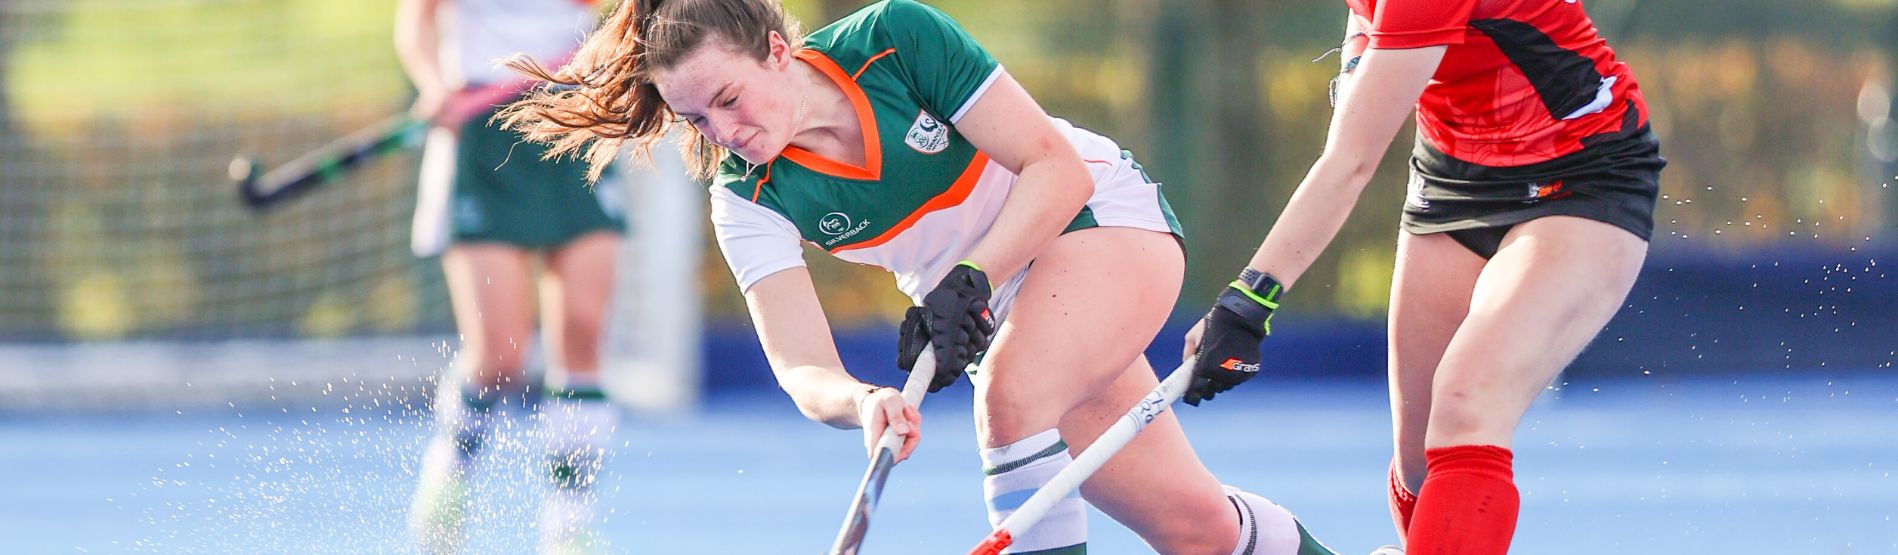 Swansea University womens hockey player takes on opponent player during hockey match